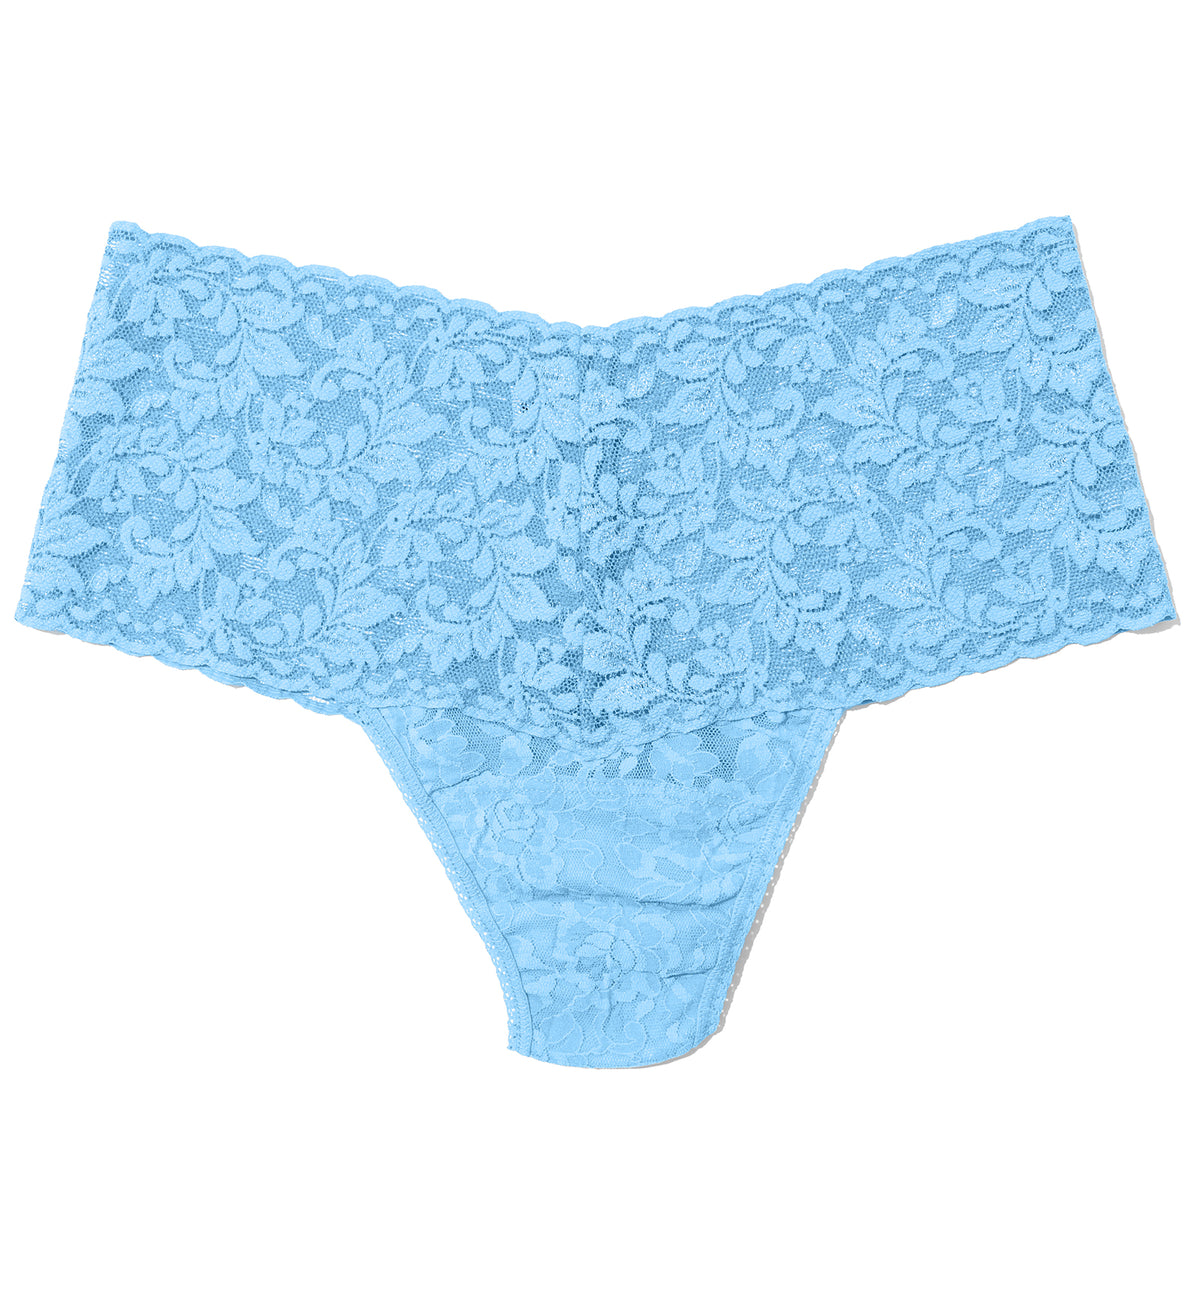 Hanky Panky Signature Lace PLUS Retro Thong (9K1926X),Partly Cloudy - Partly Cloudy,One Size